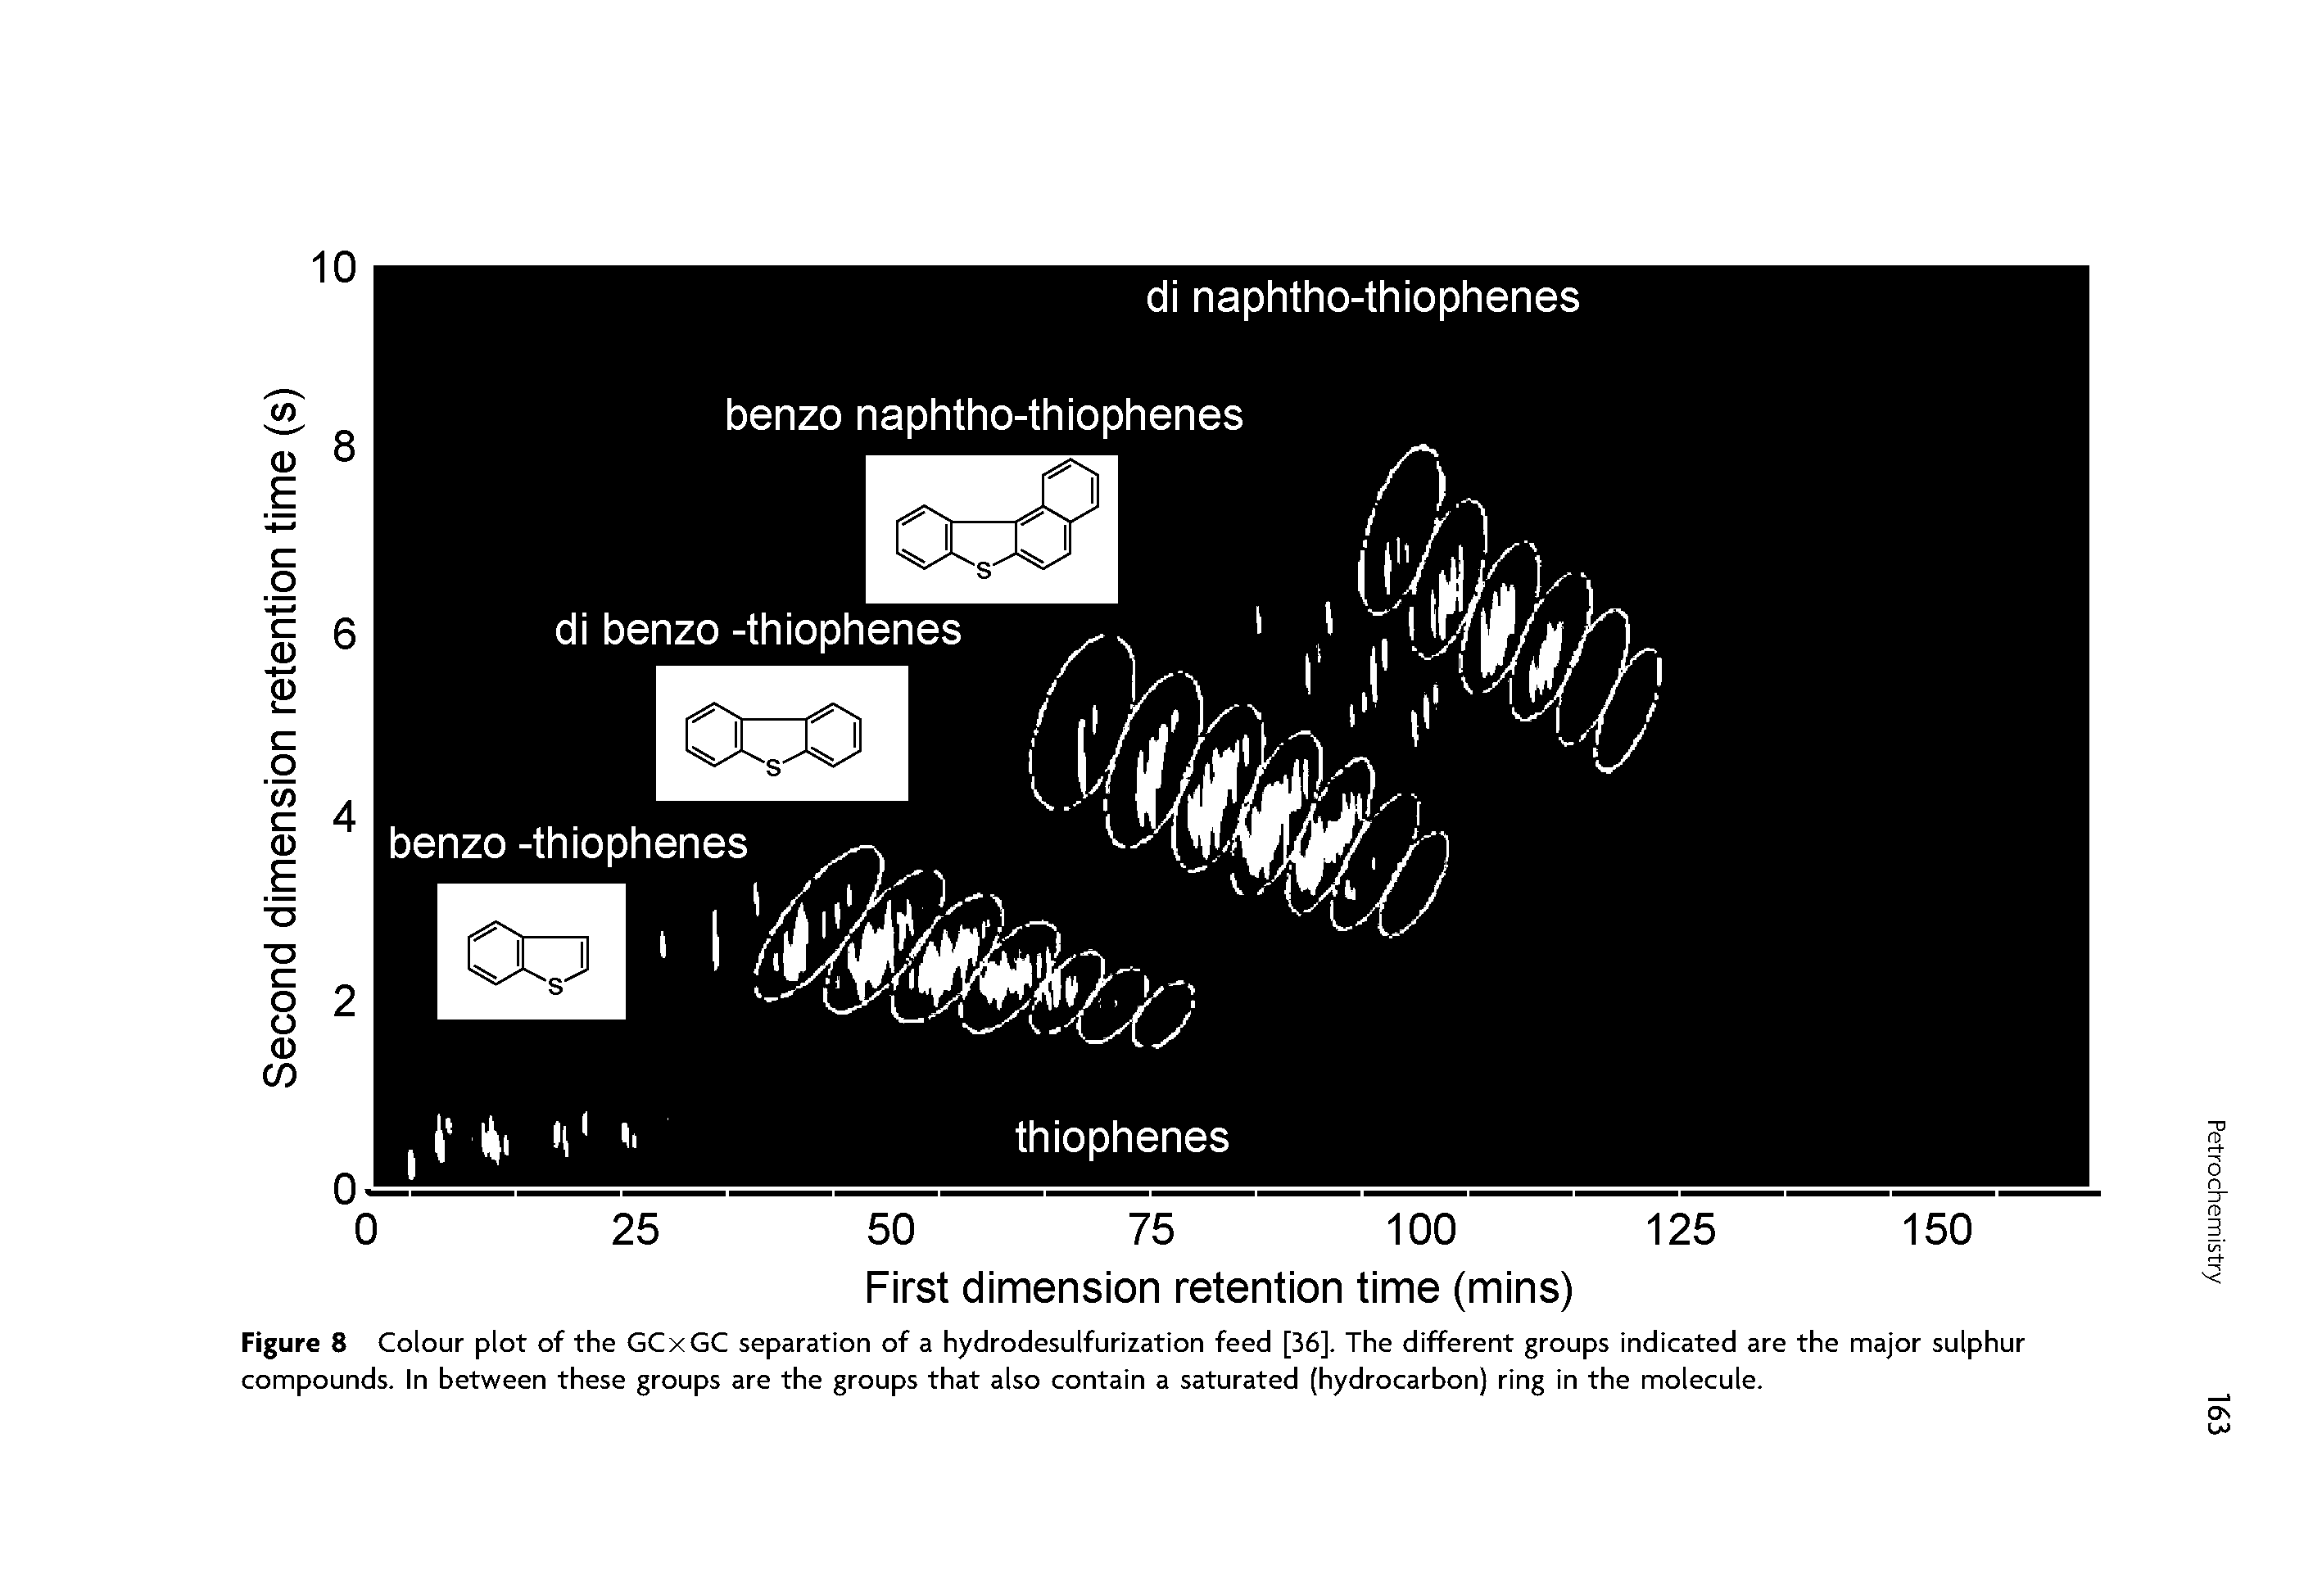 Figure 8 Colour plot of the GCxGC separation of a hydrodesulfurization feed [36]. The different groups indicated are the major sulphur compounds. In between these groups are the groups that also contain a saturated (hydrocarbon) ring in the molecule.